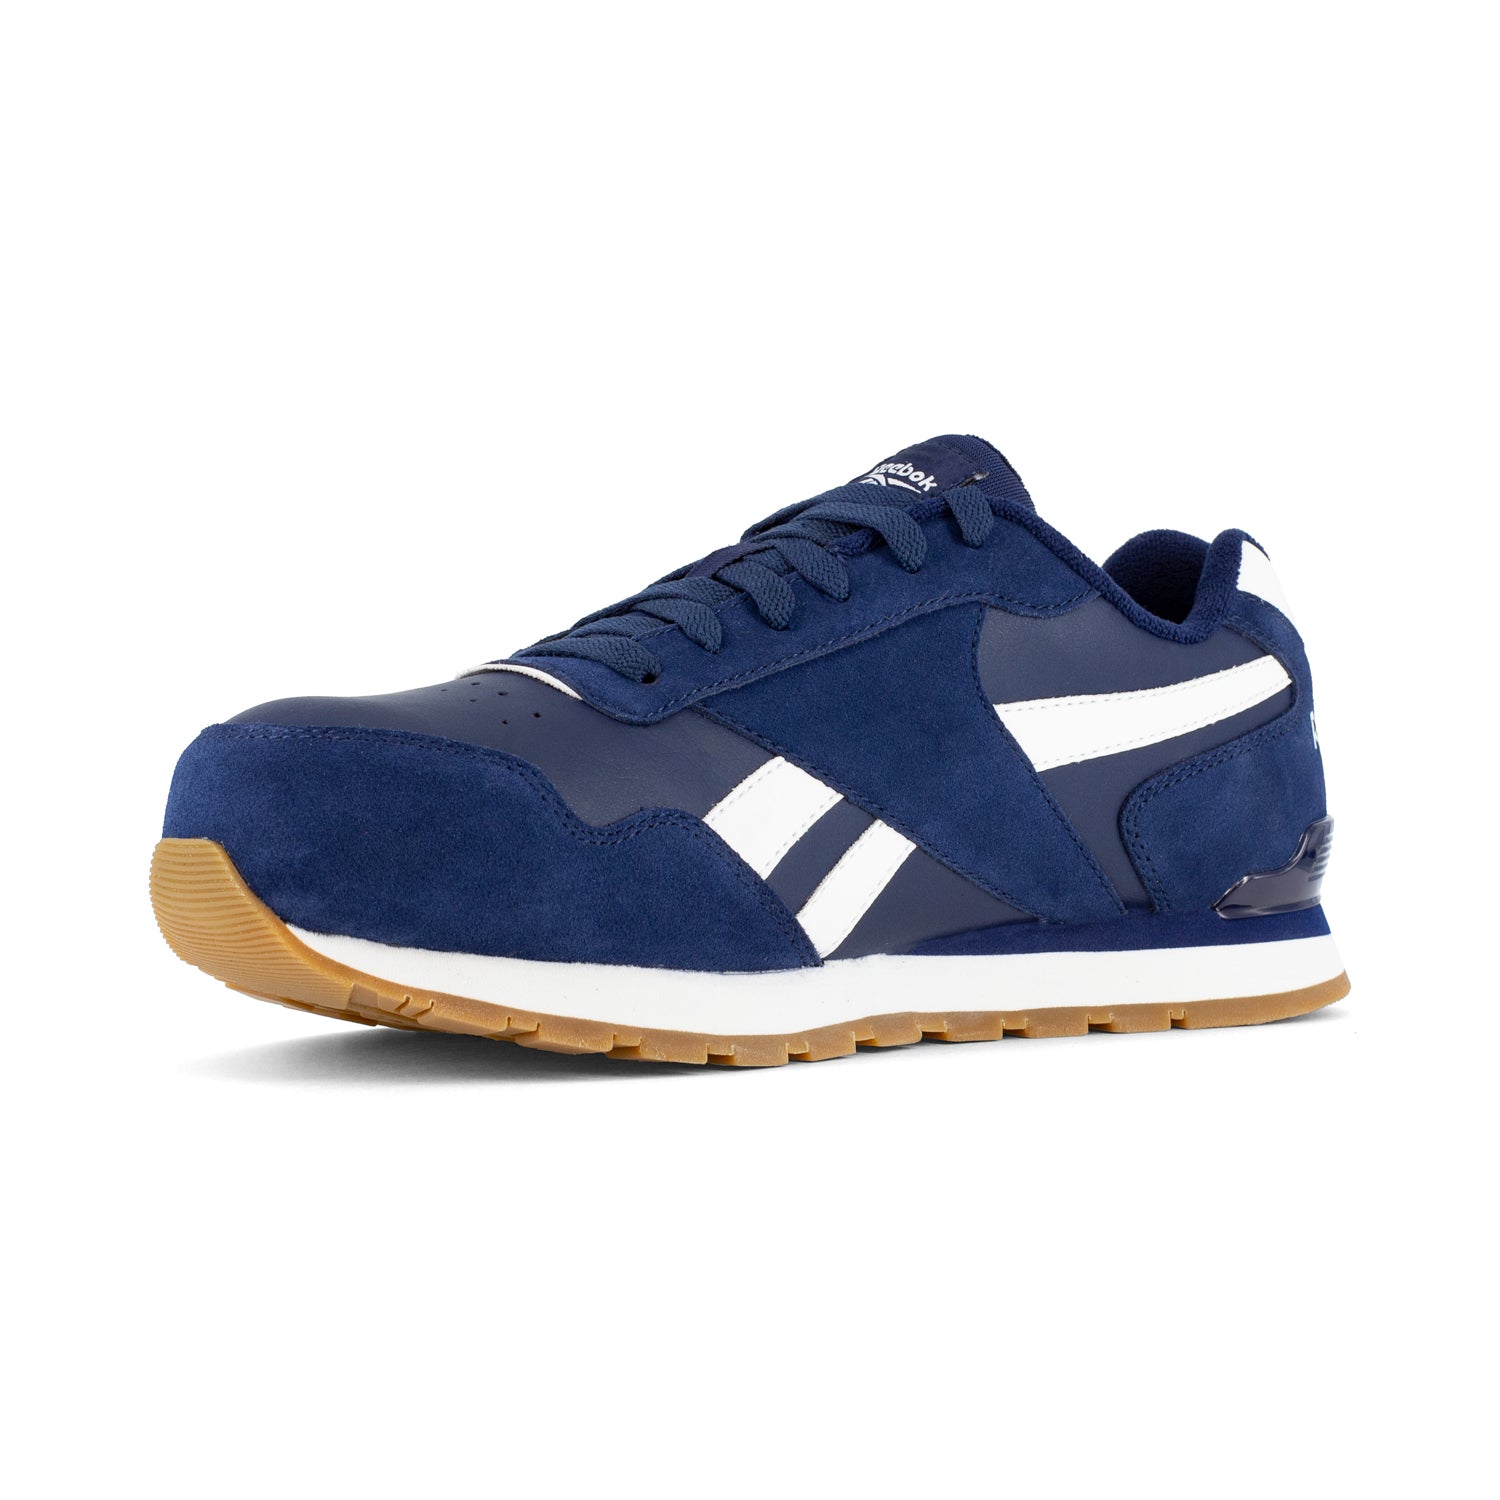 Reebok Navy/White Leather Shoes Harman Sneaker CT – The Western Company